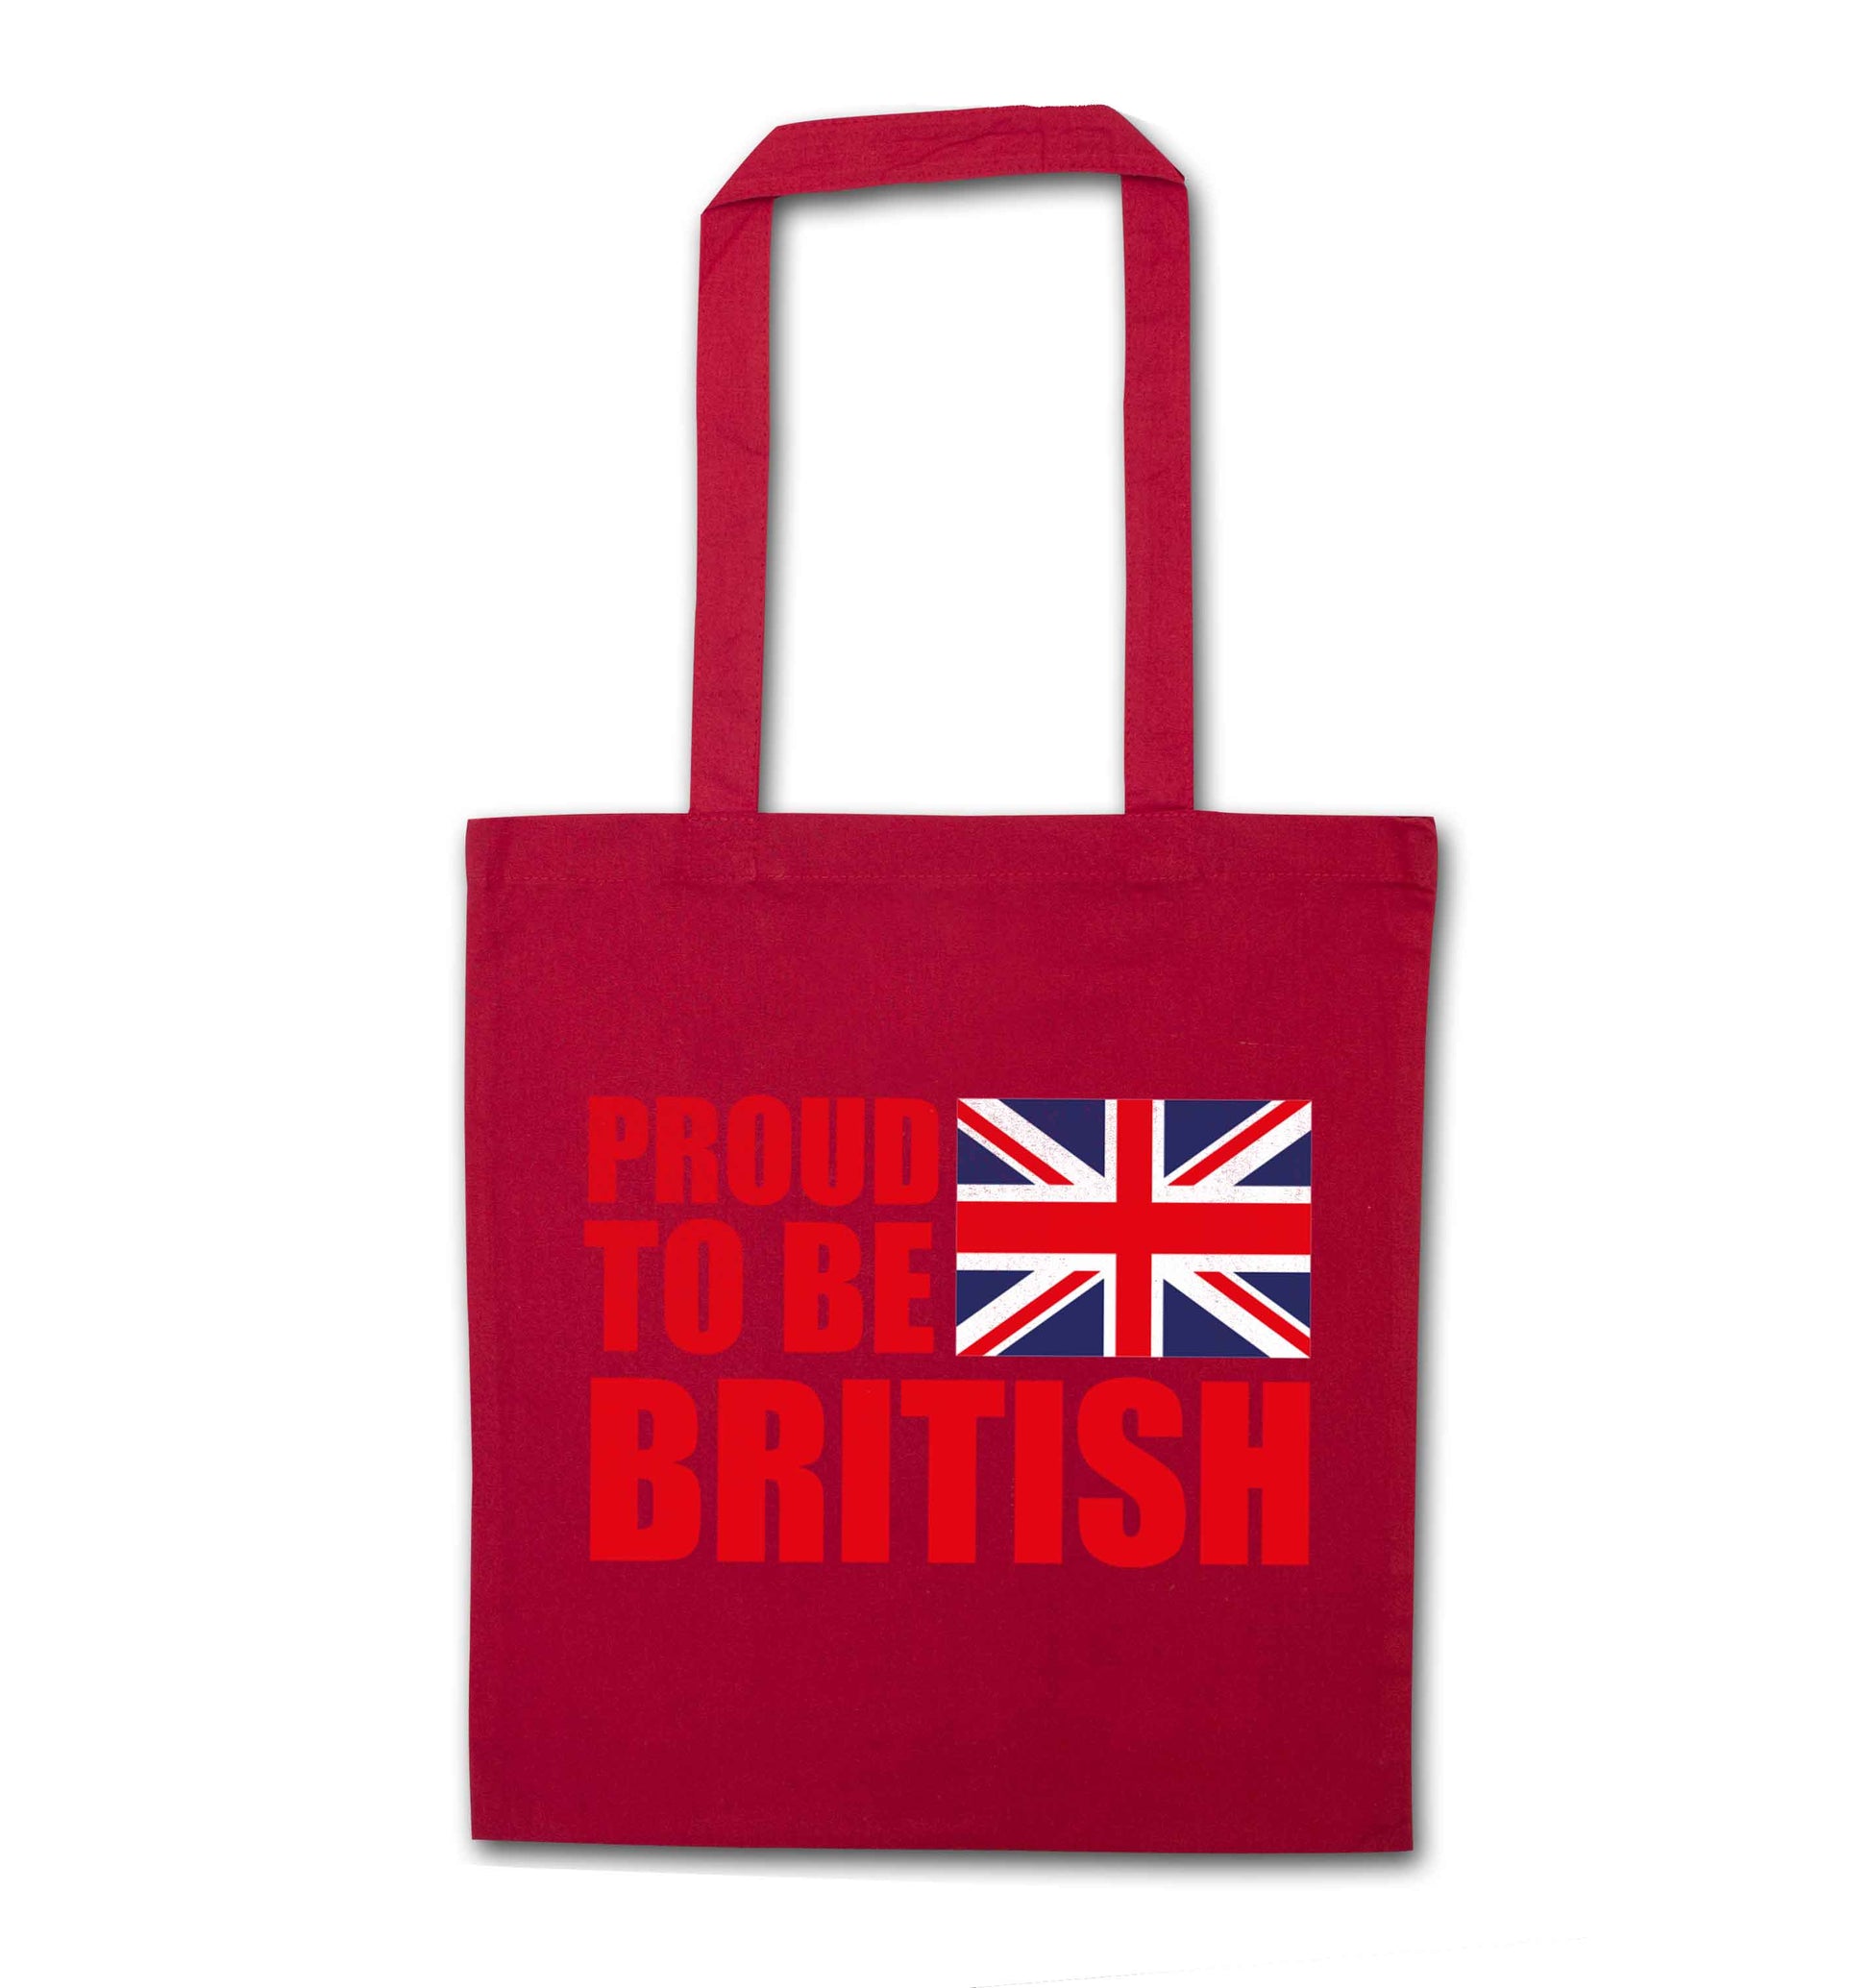 Proud to be British red tote bag